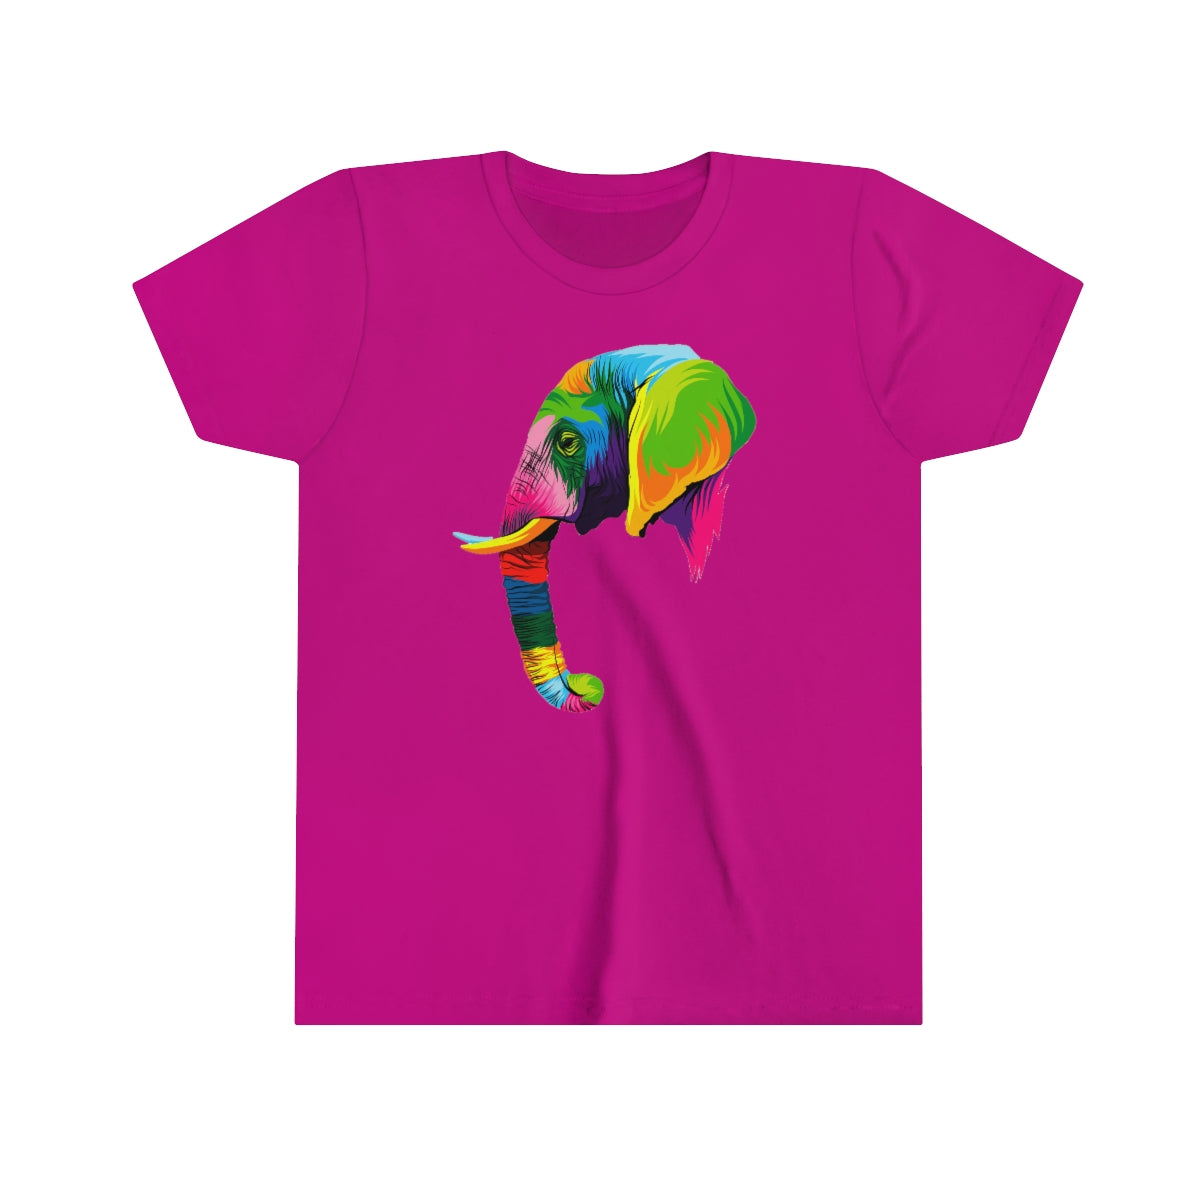 Youth Short Sleeve Tee "Abstract colorful elephant"